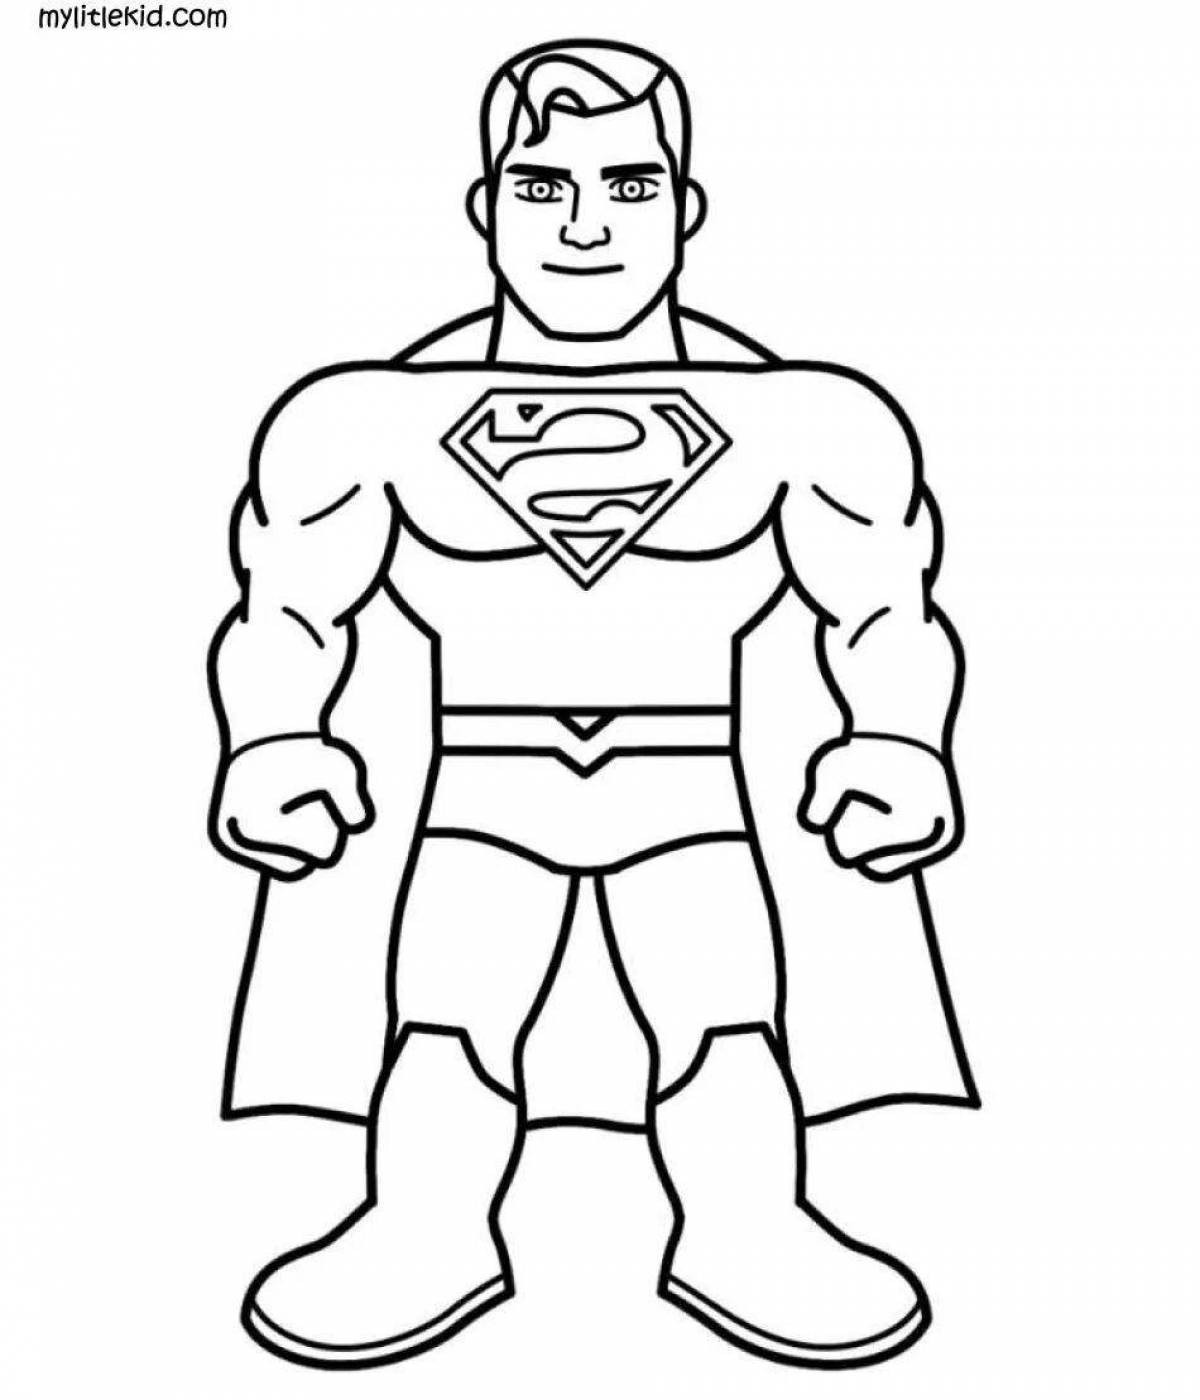 Creative superman coloring book for 3-4 year olds